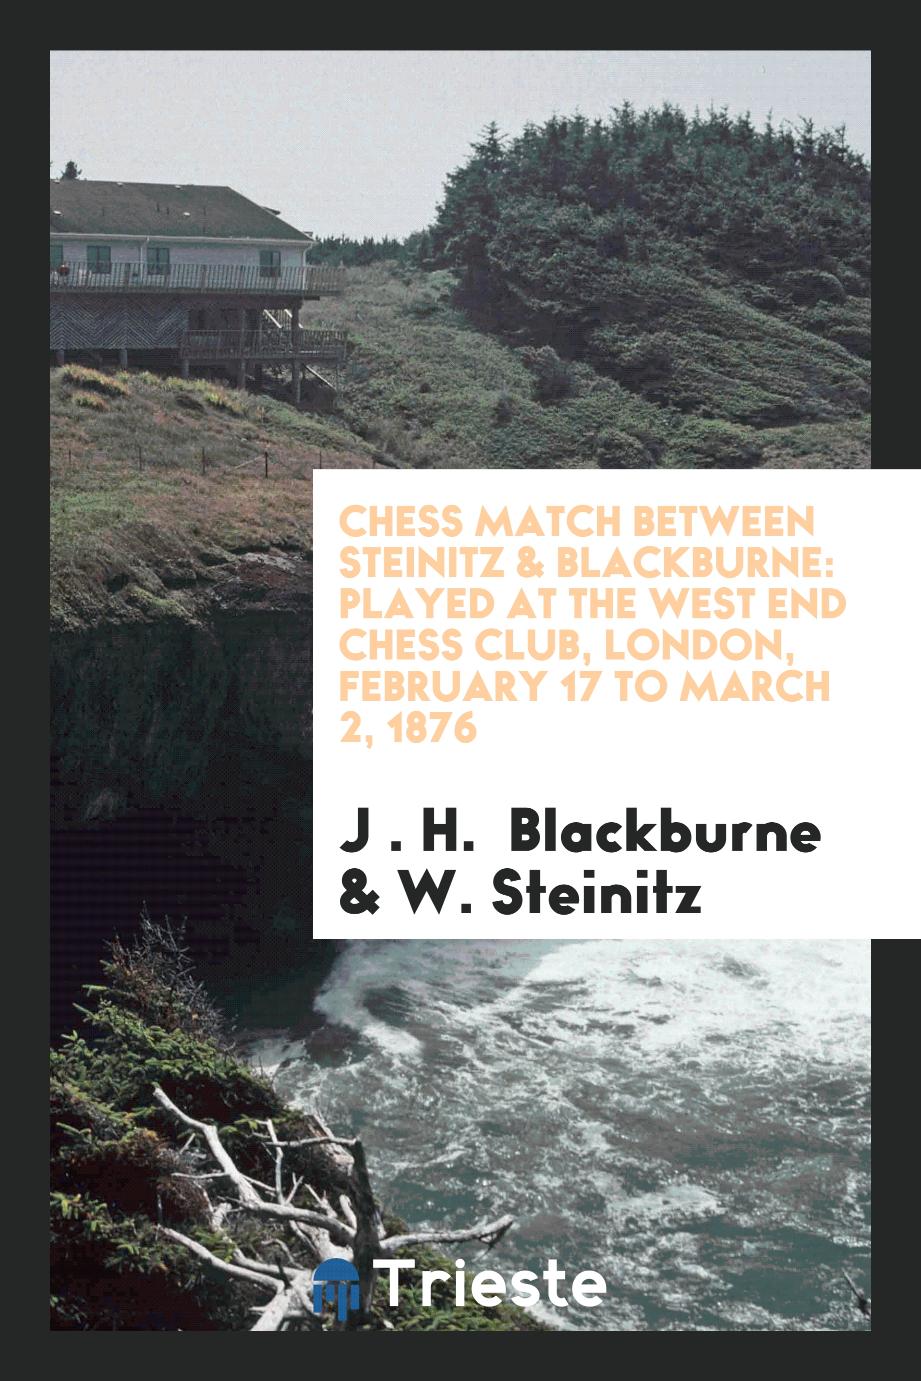 Chess Match Between Steinitz & Blackburne: Played at the West End Chess Club, London, February 17 to March 2, 1876